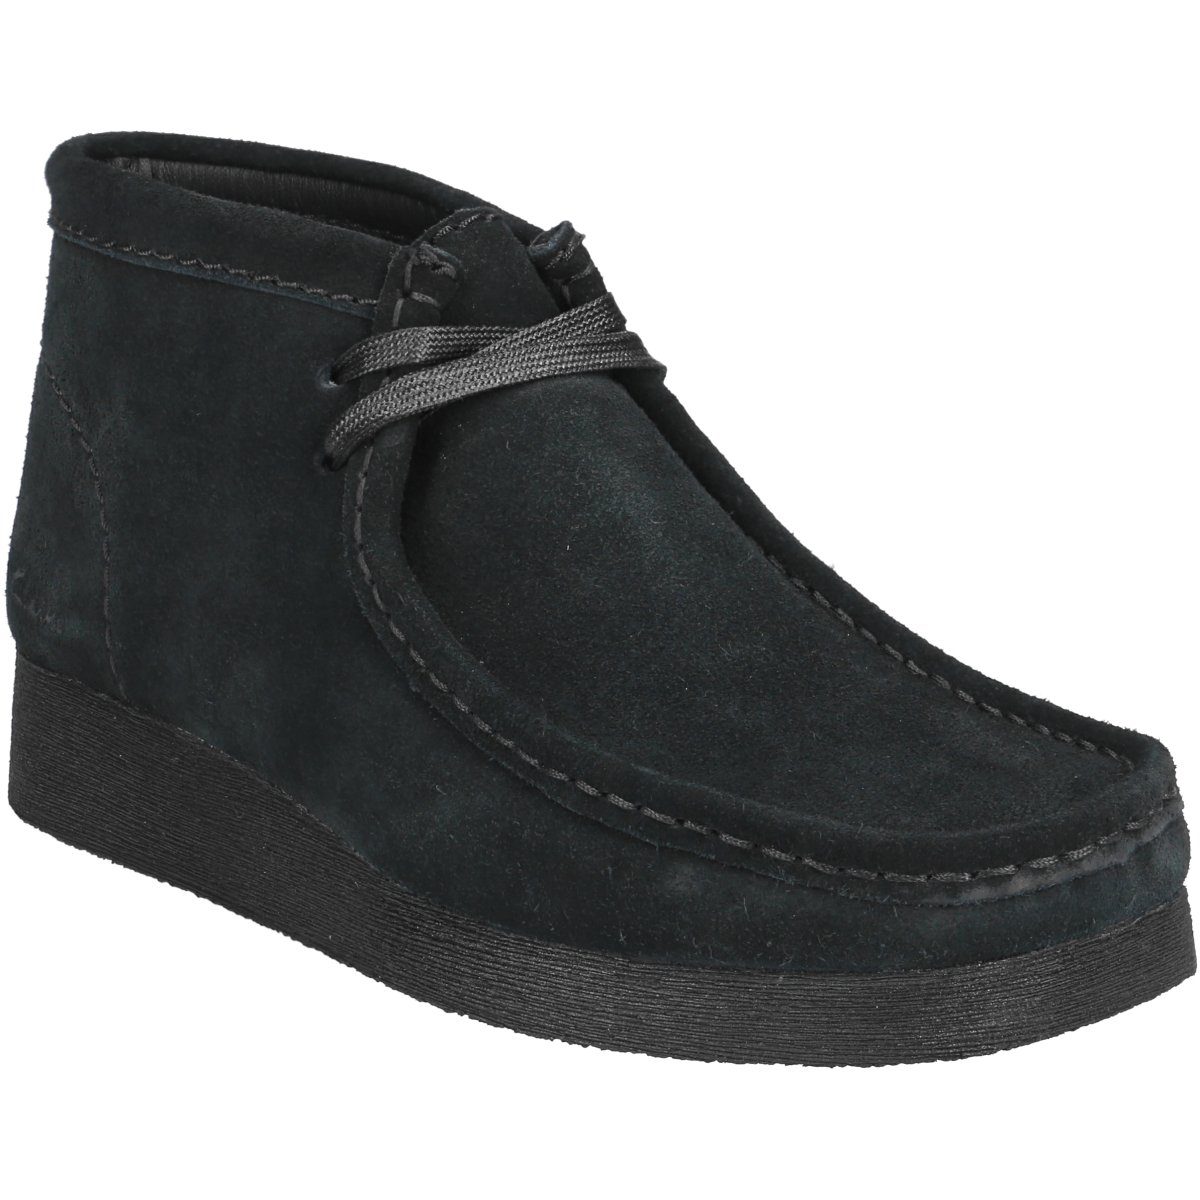 Clarks Wallabee Boot 2 26161529 4 Stiefel